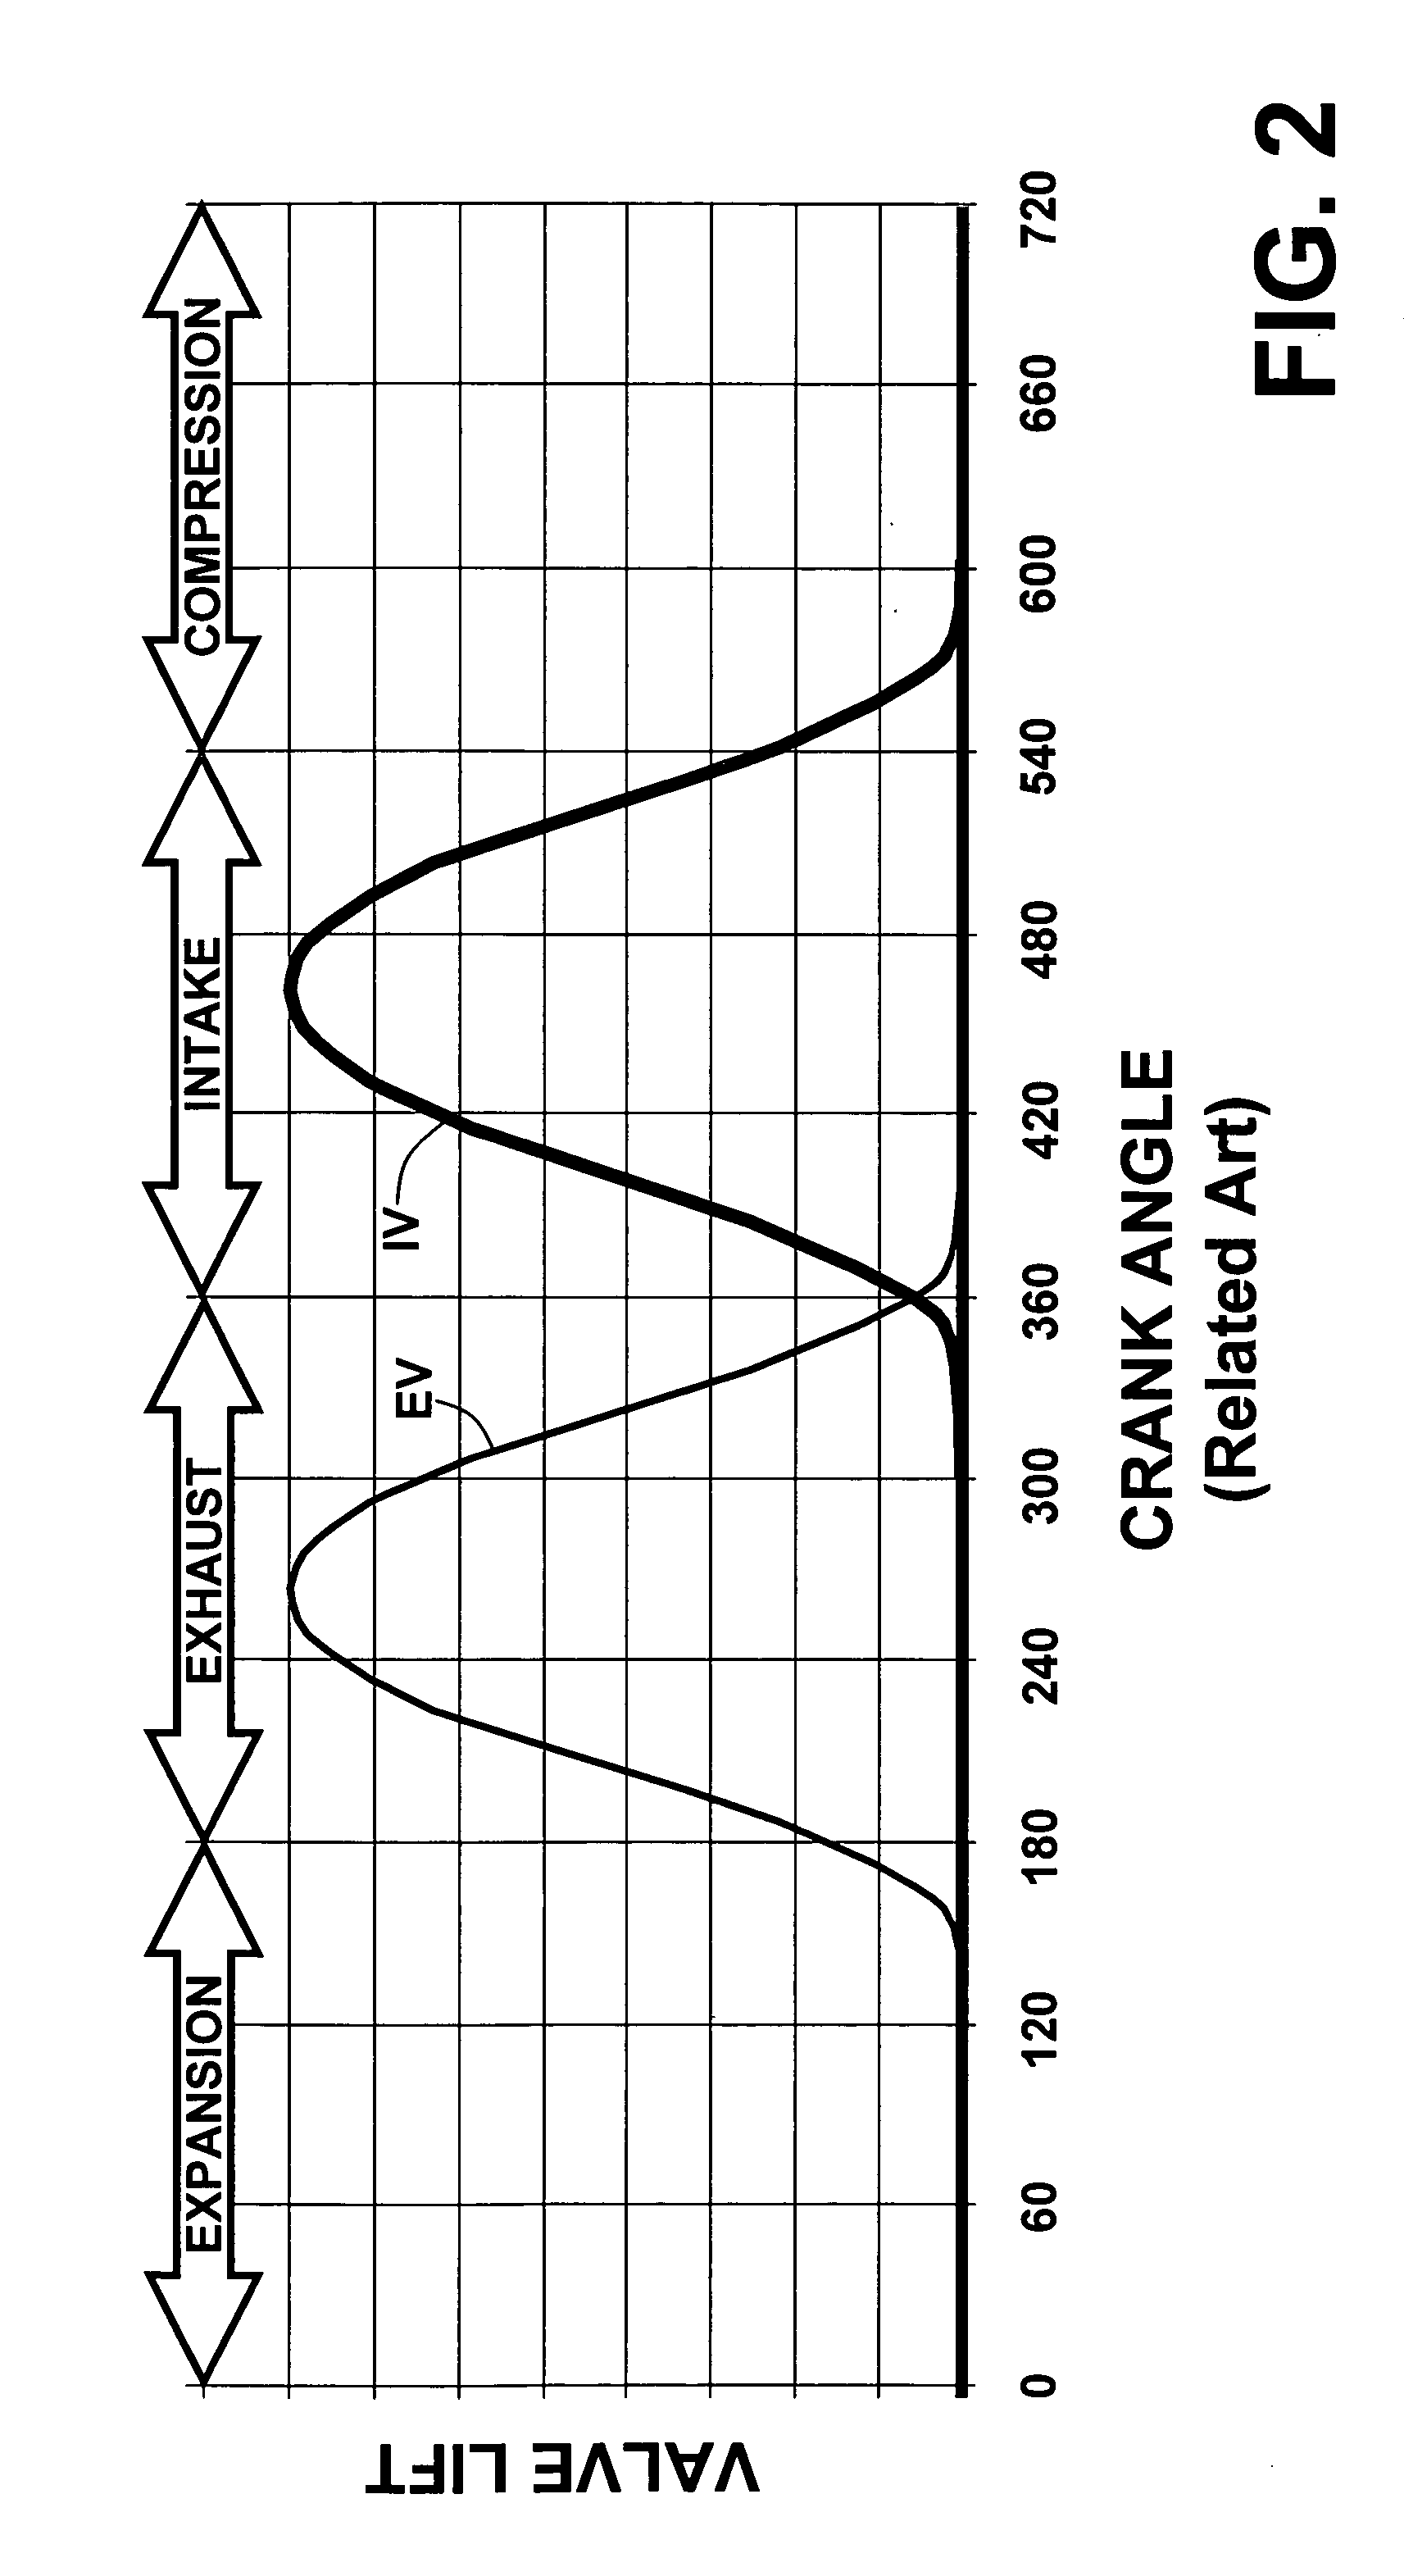 Valve and fueling strategy for operating a controlled auto-ignition four-stroke internal combustion engine